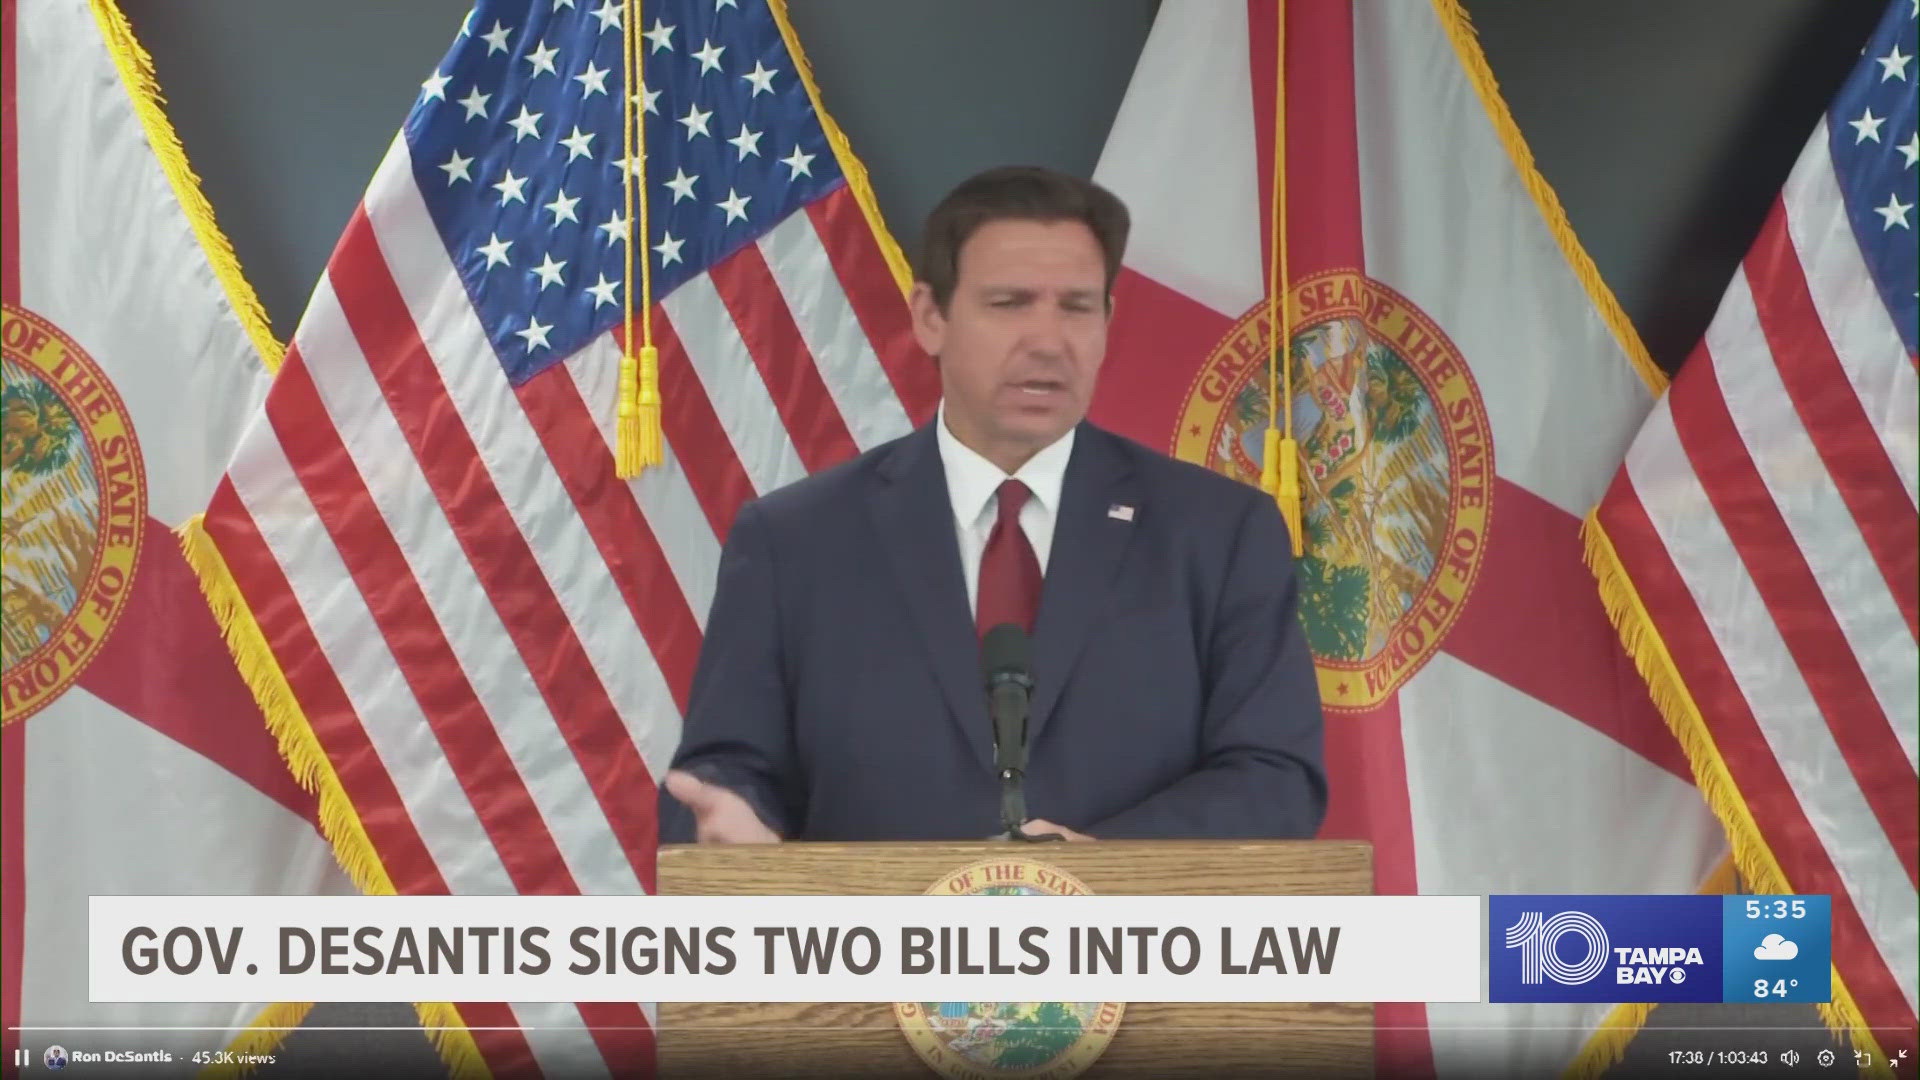 DeSantis signed HB 989 and HB 1291 into law on Thursday.